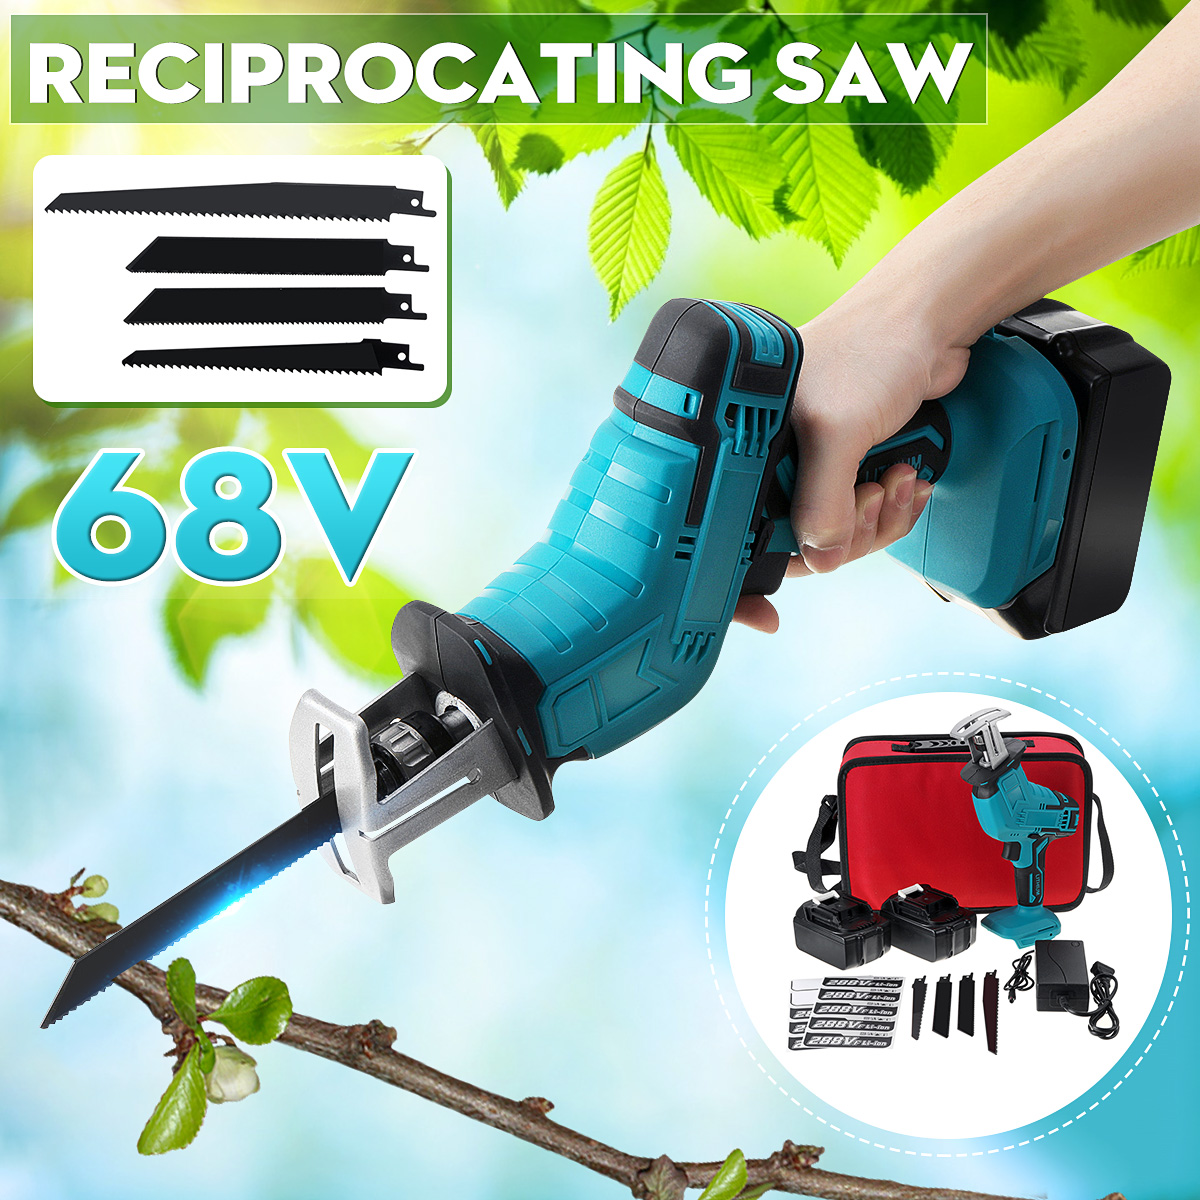 68V-Electric-Reciprocating-Saw-Outdoor-Woodworking-Cordless-Handheld-Saw-9000mah-1683596-1